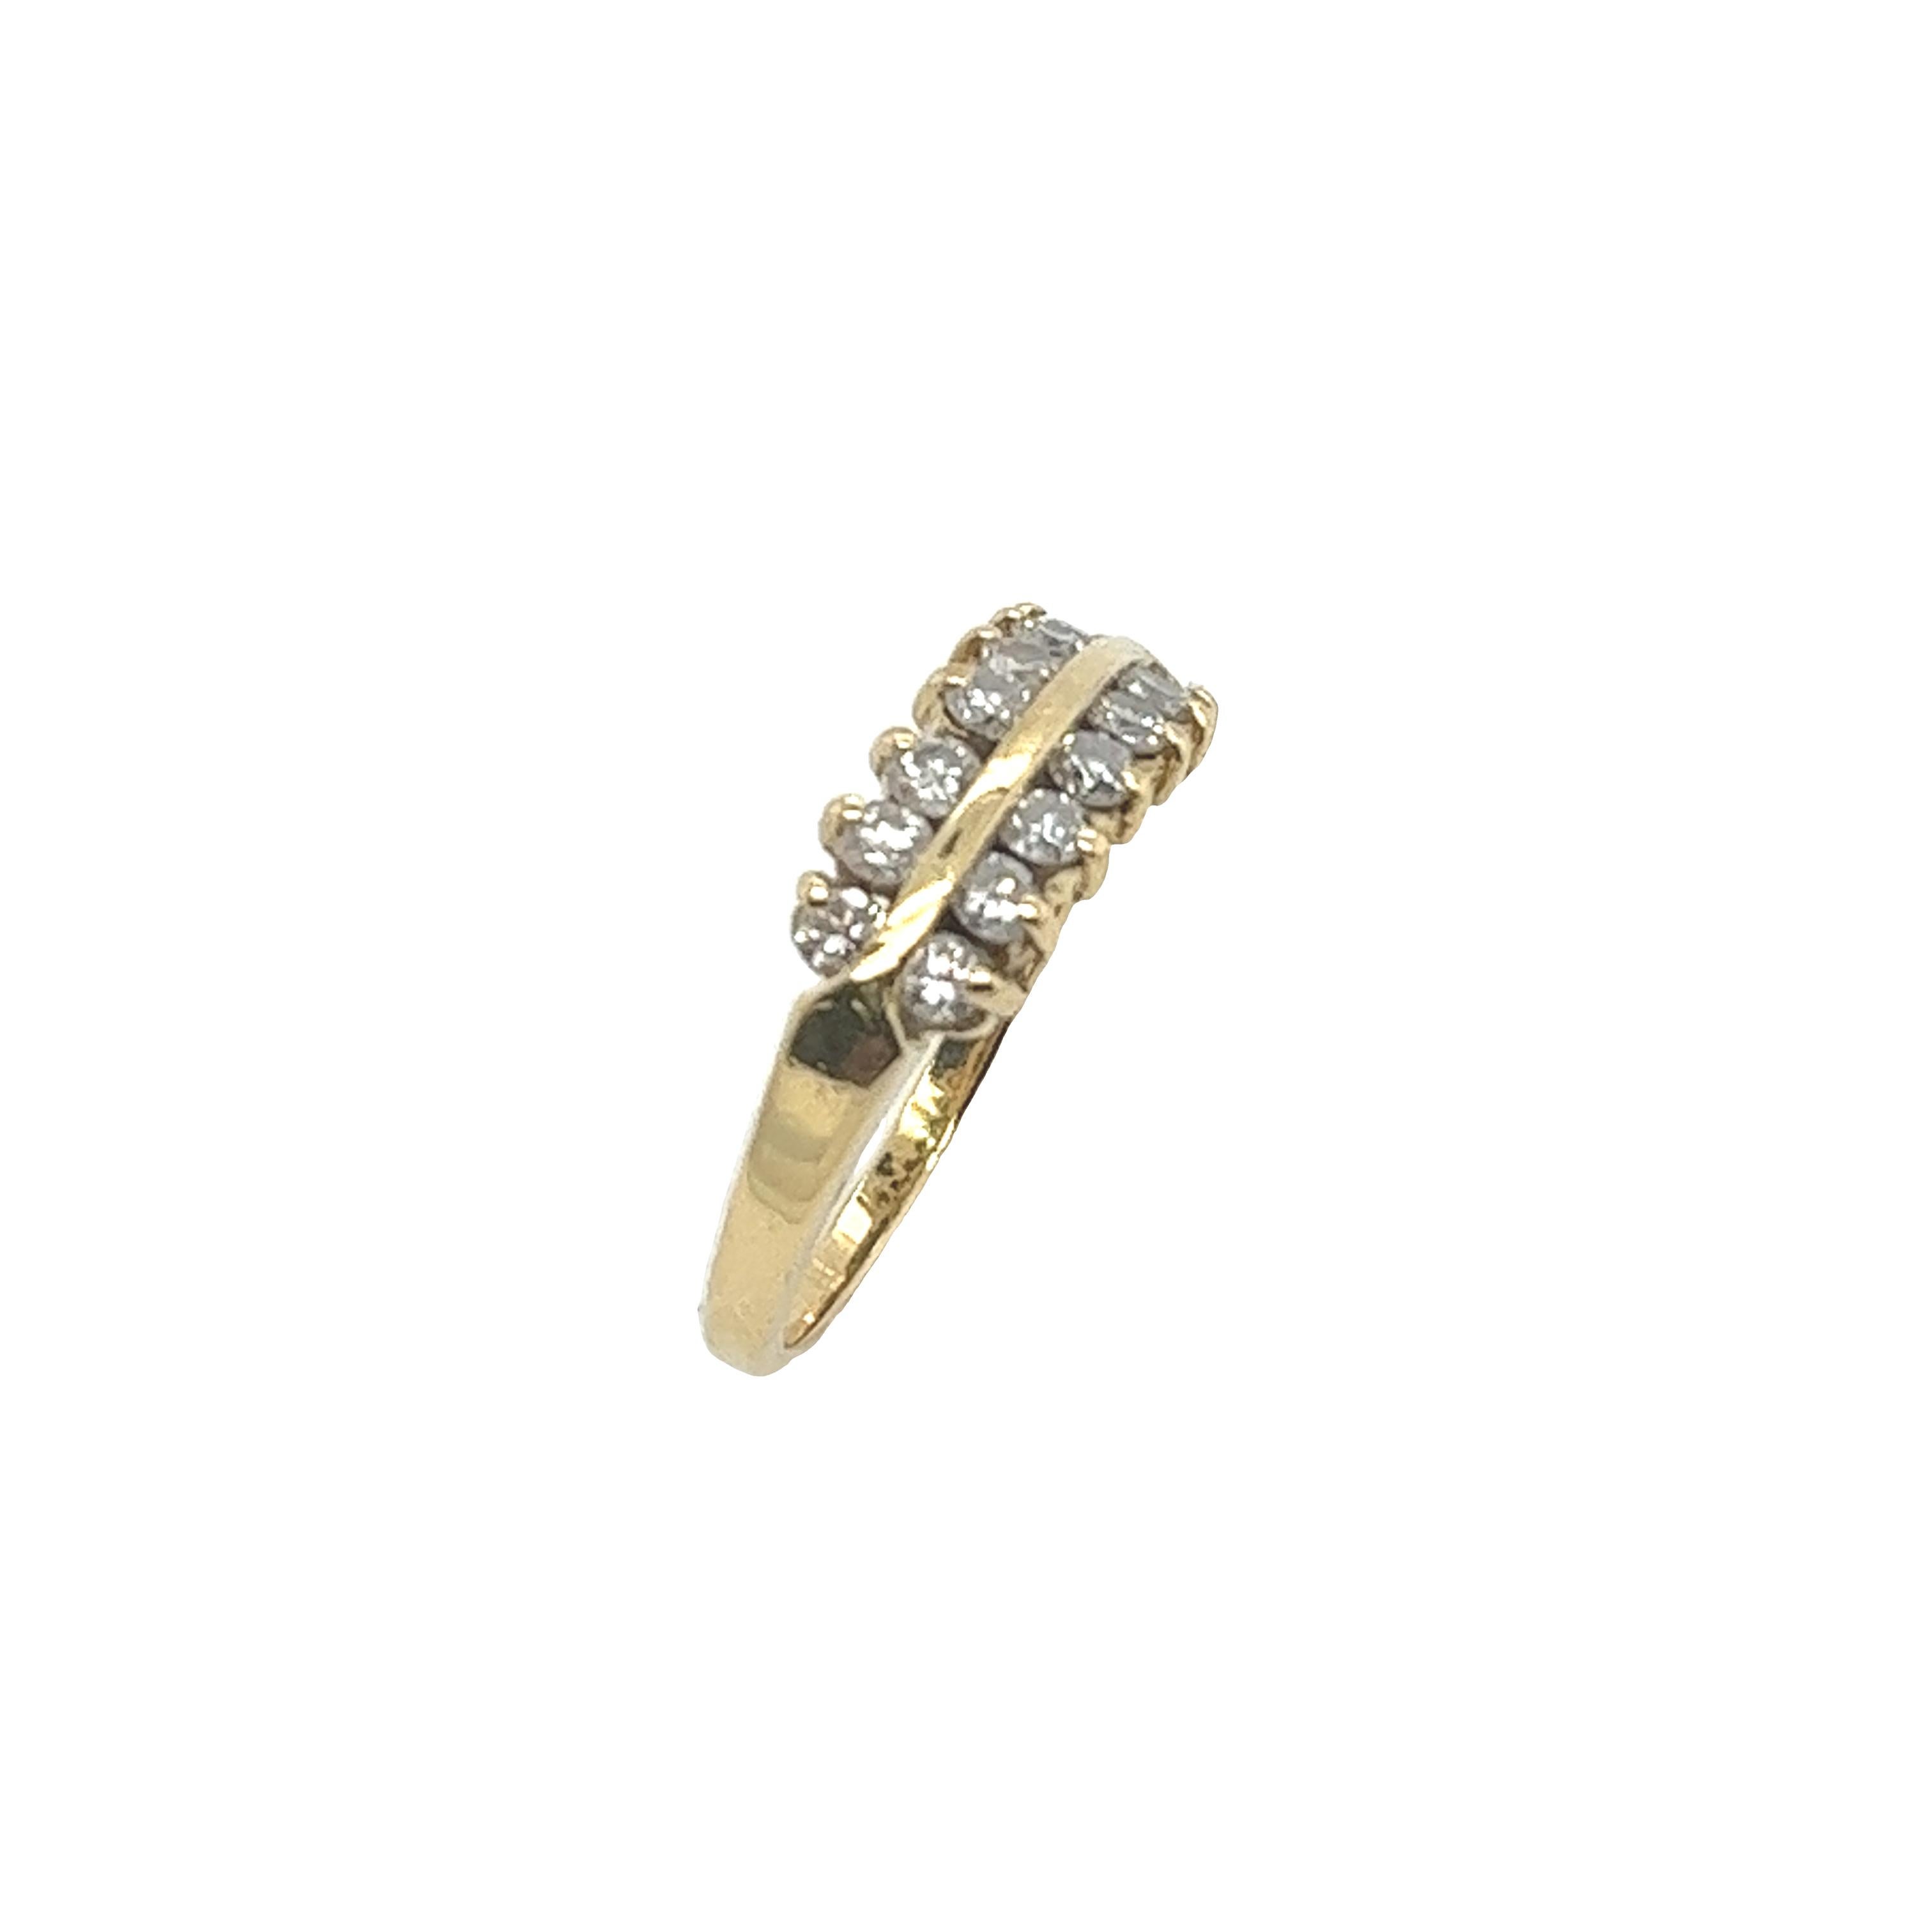 An elegant diamond 2-row ring, 
set with 14 round brilliant cut natural diamonds, 
0.42ct total diamond weight.
in an 18ct yellow gold setting.
Total Diamond Weight: 0.42ct
Diamond Colour: H
Diamond Clarity: SI1
Width of Band: 1.61mm
Length of Head: